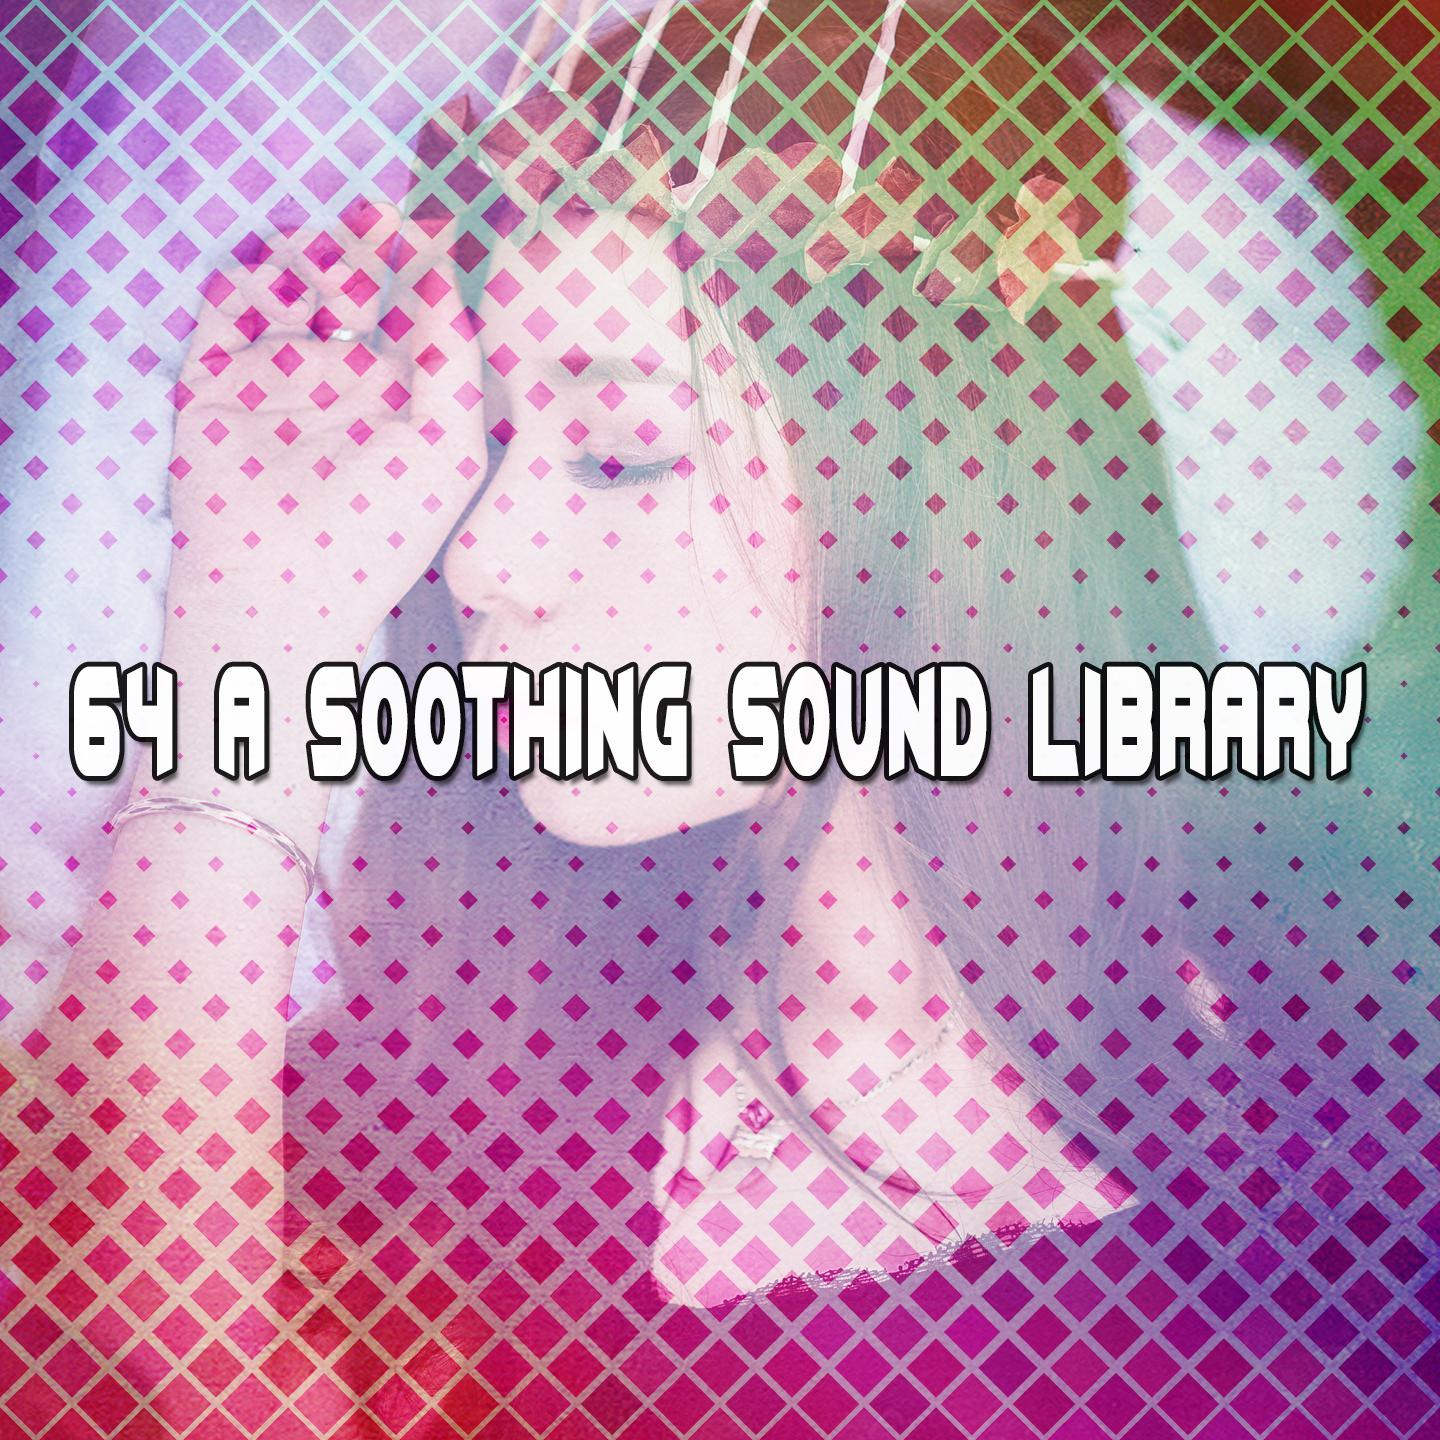 64 A Soothing Sound Library